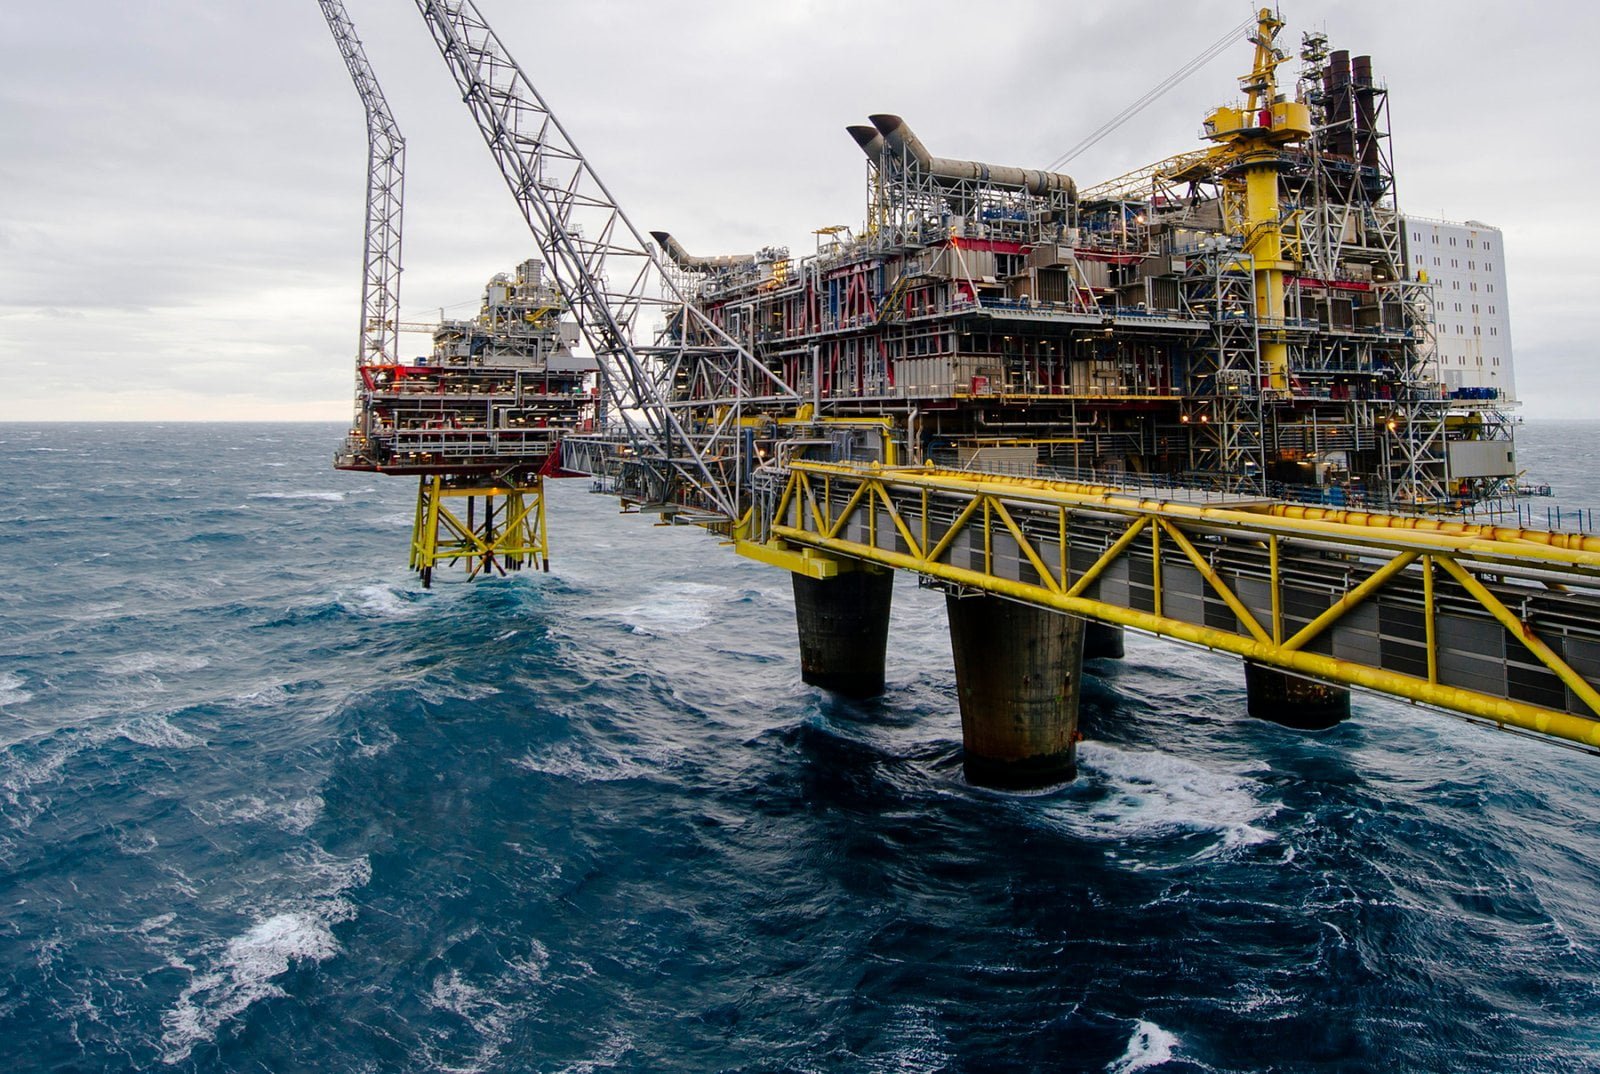 uk-offers-new-north-sea-oil-and-gas-licences-despite-climate-concerns